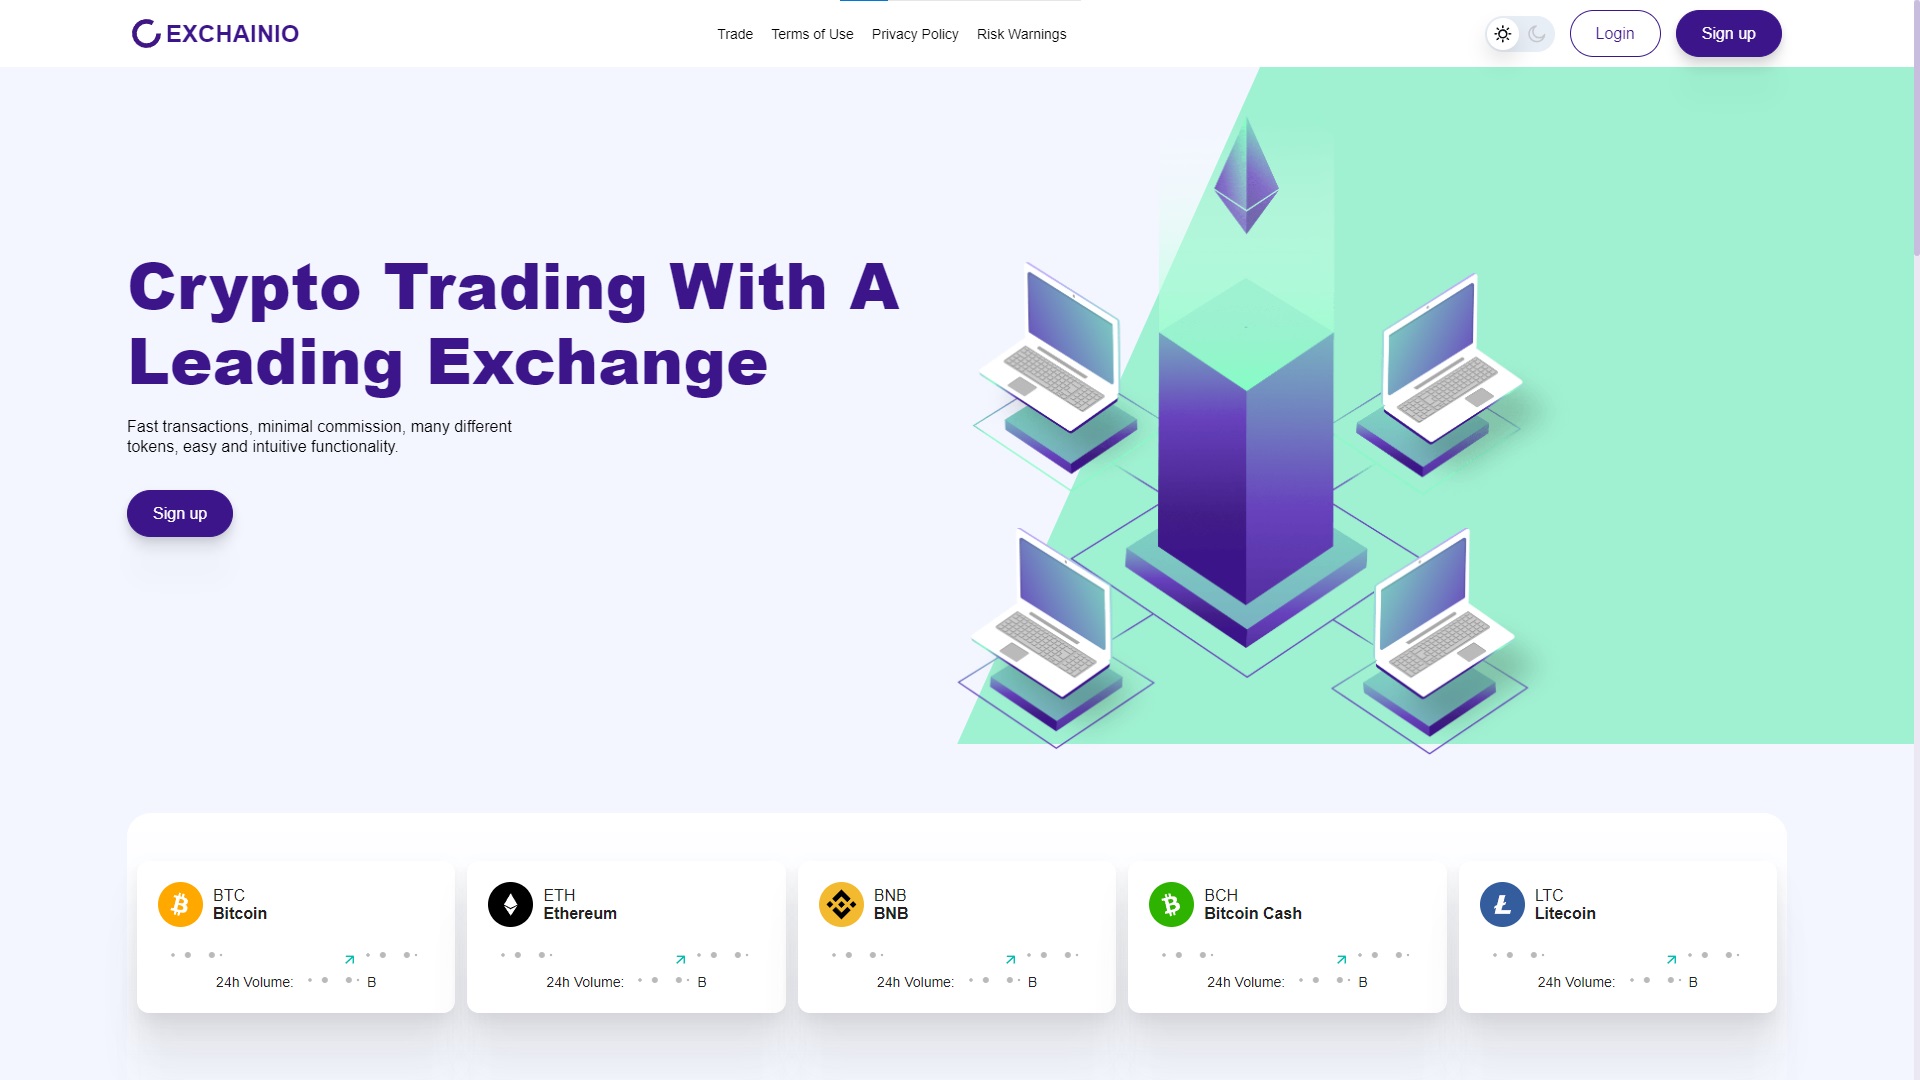 Is Exchainio a Scam Cryptocurrency Trading at exchainio.com?